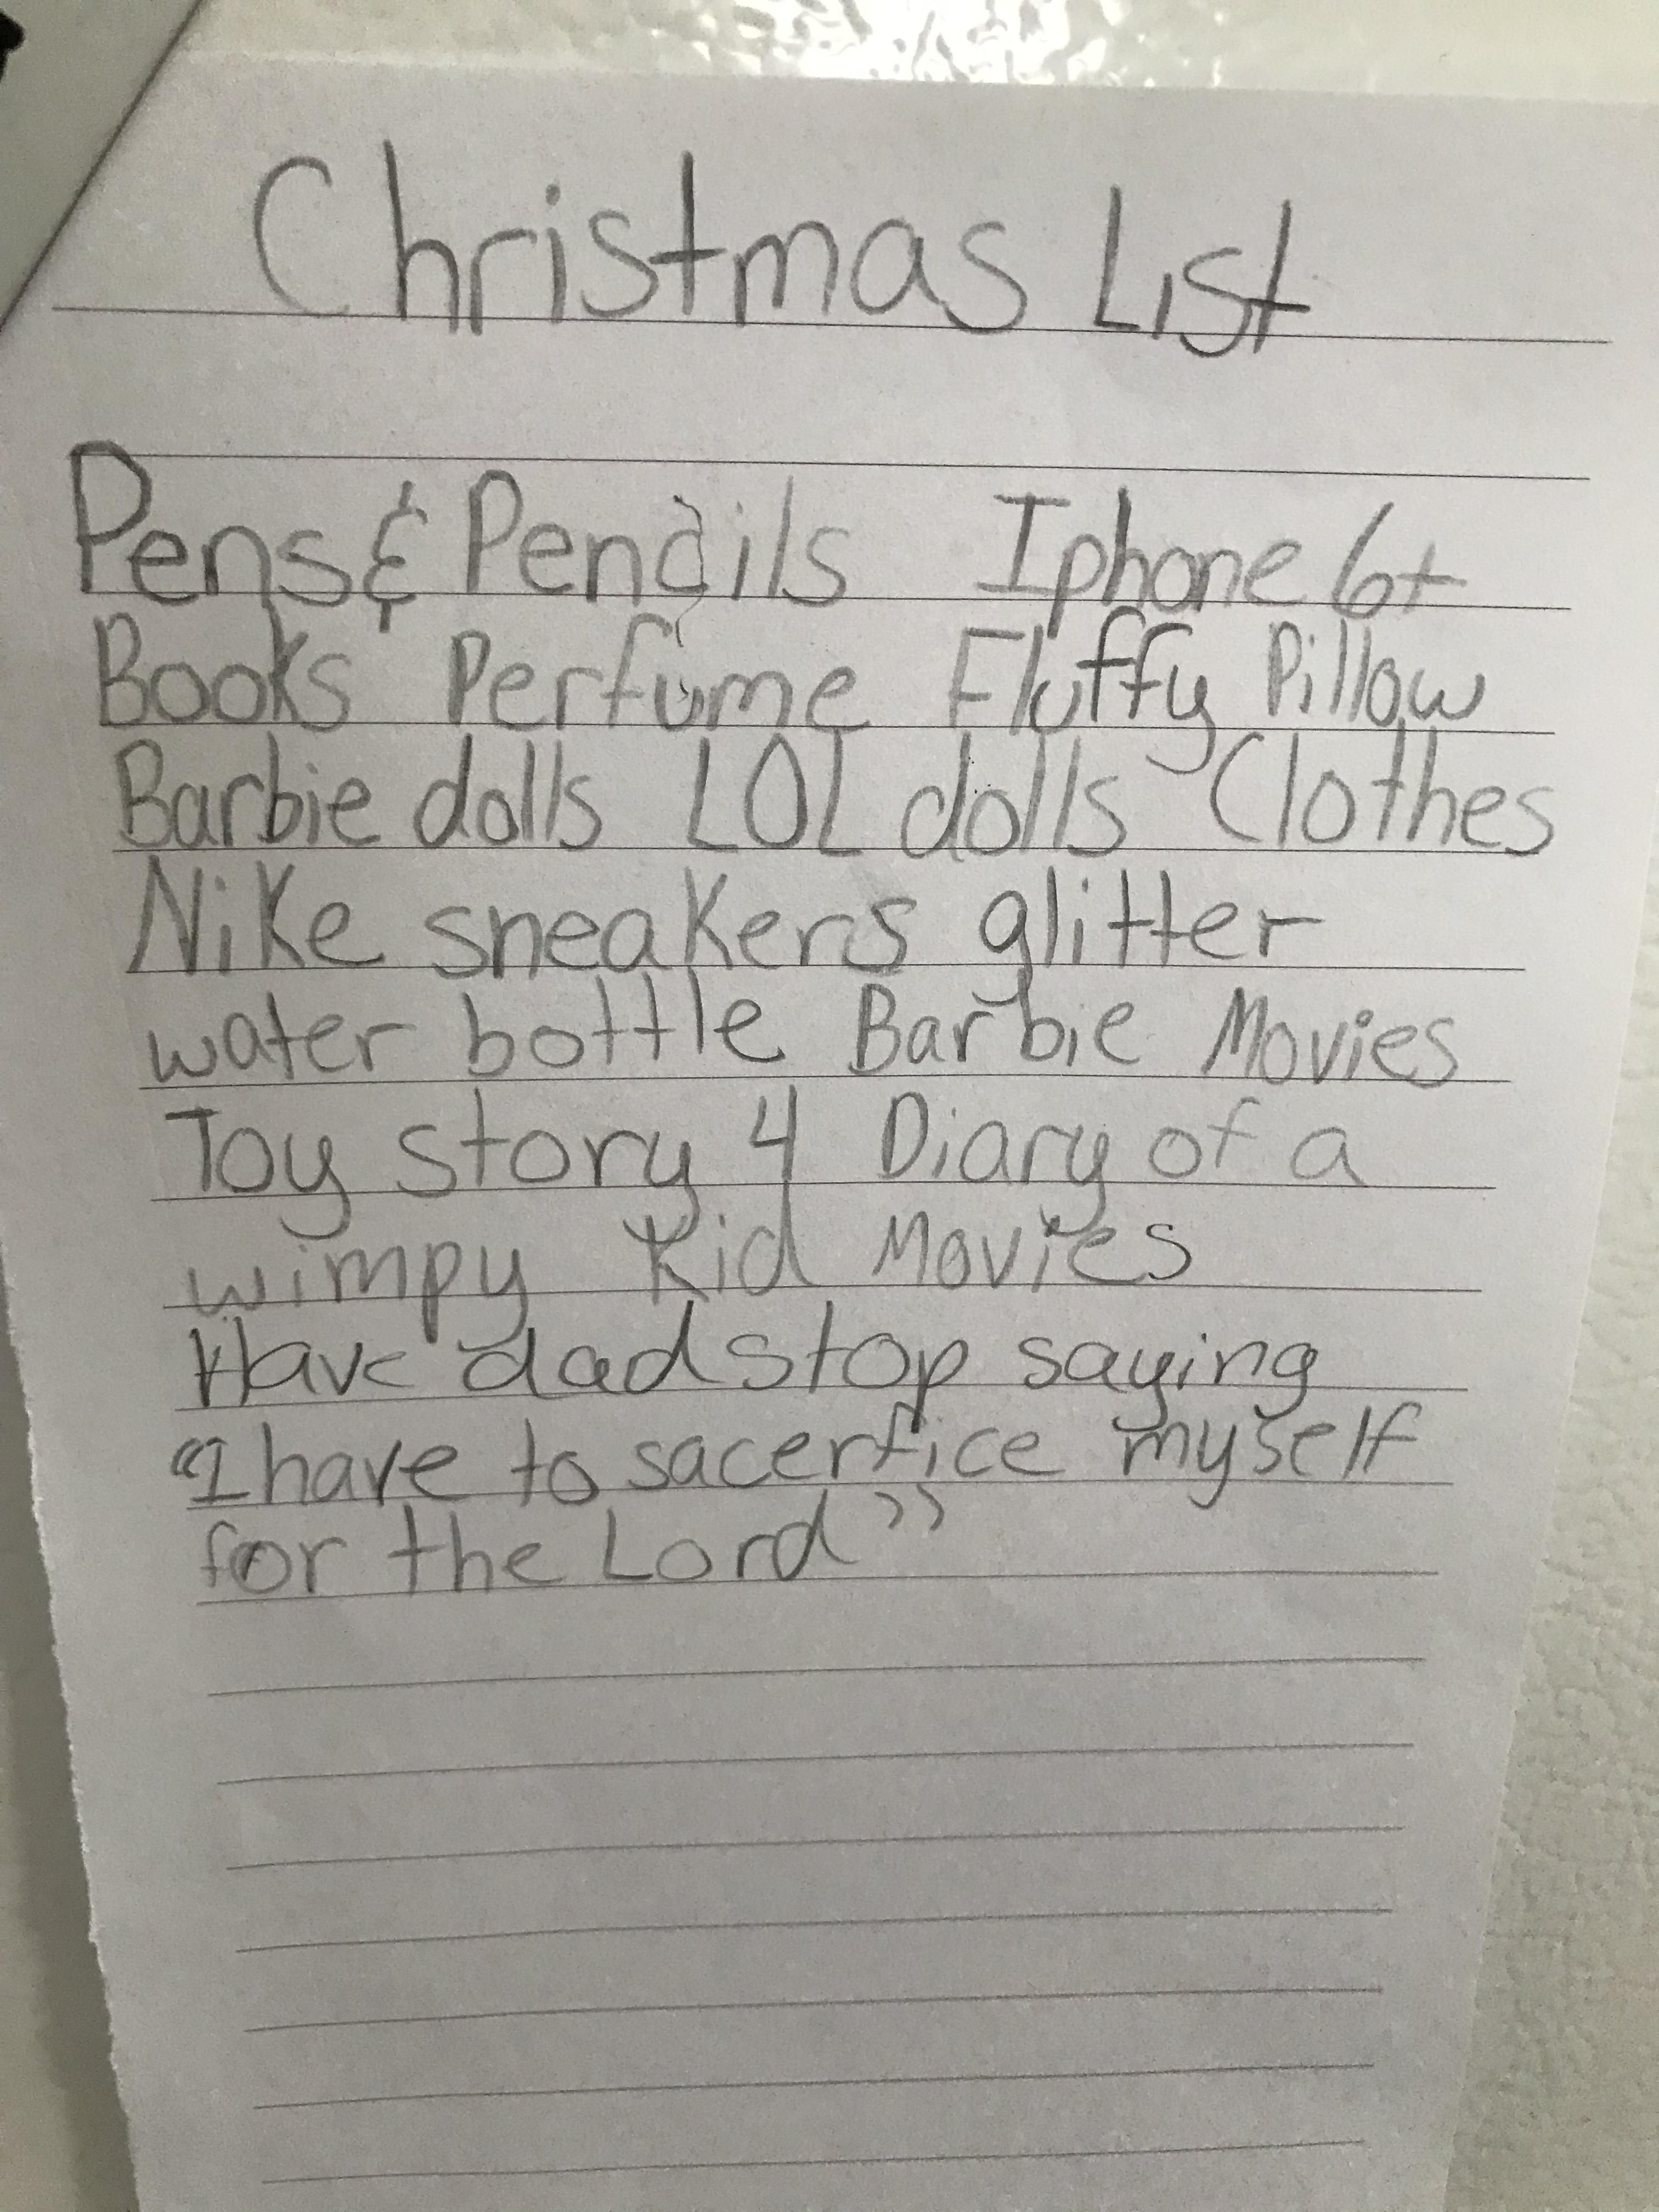 My daughters Christmas list I just read. I almost choked on my burger.